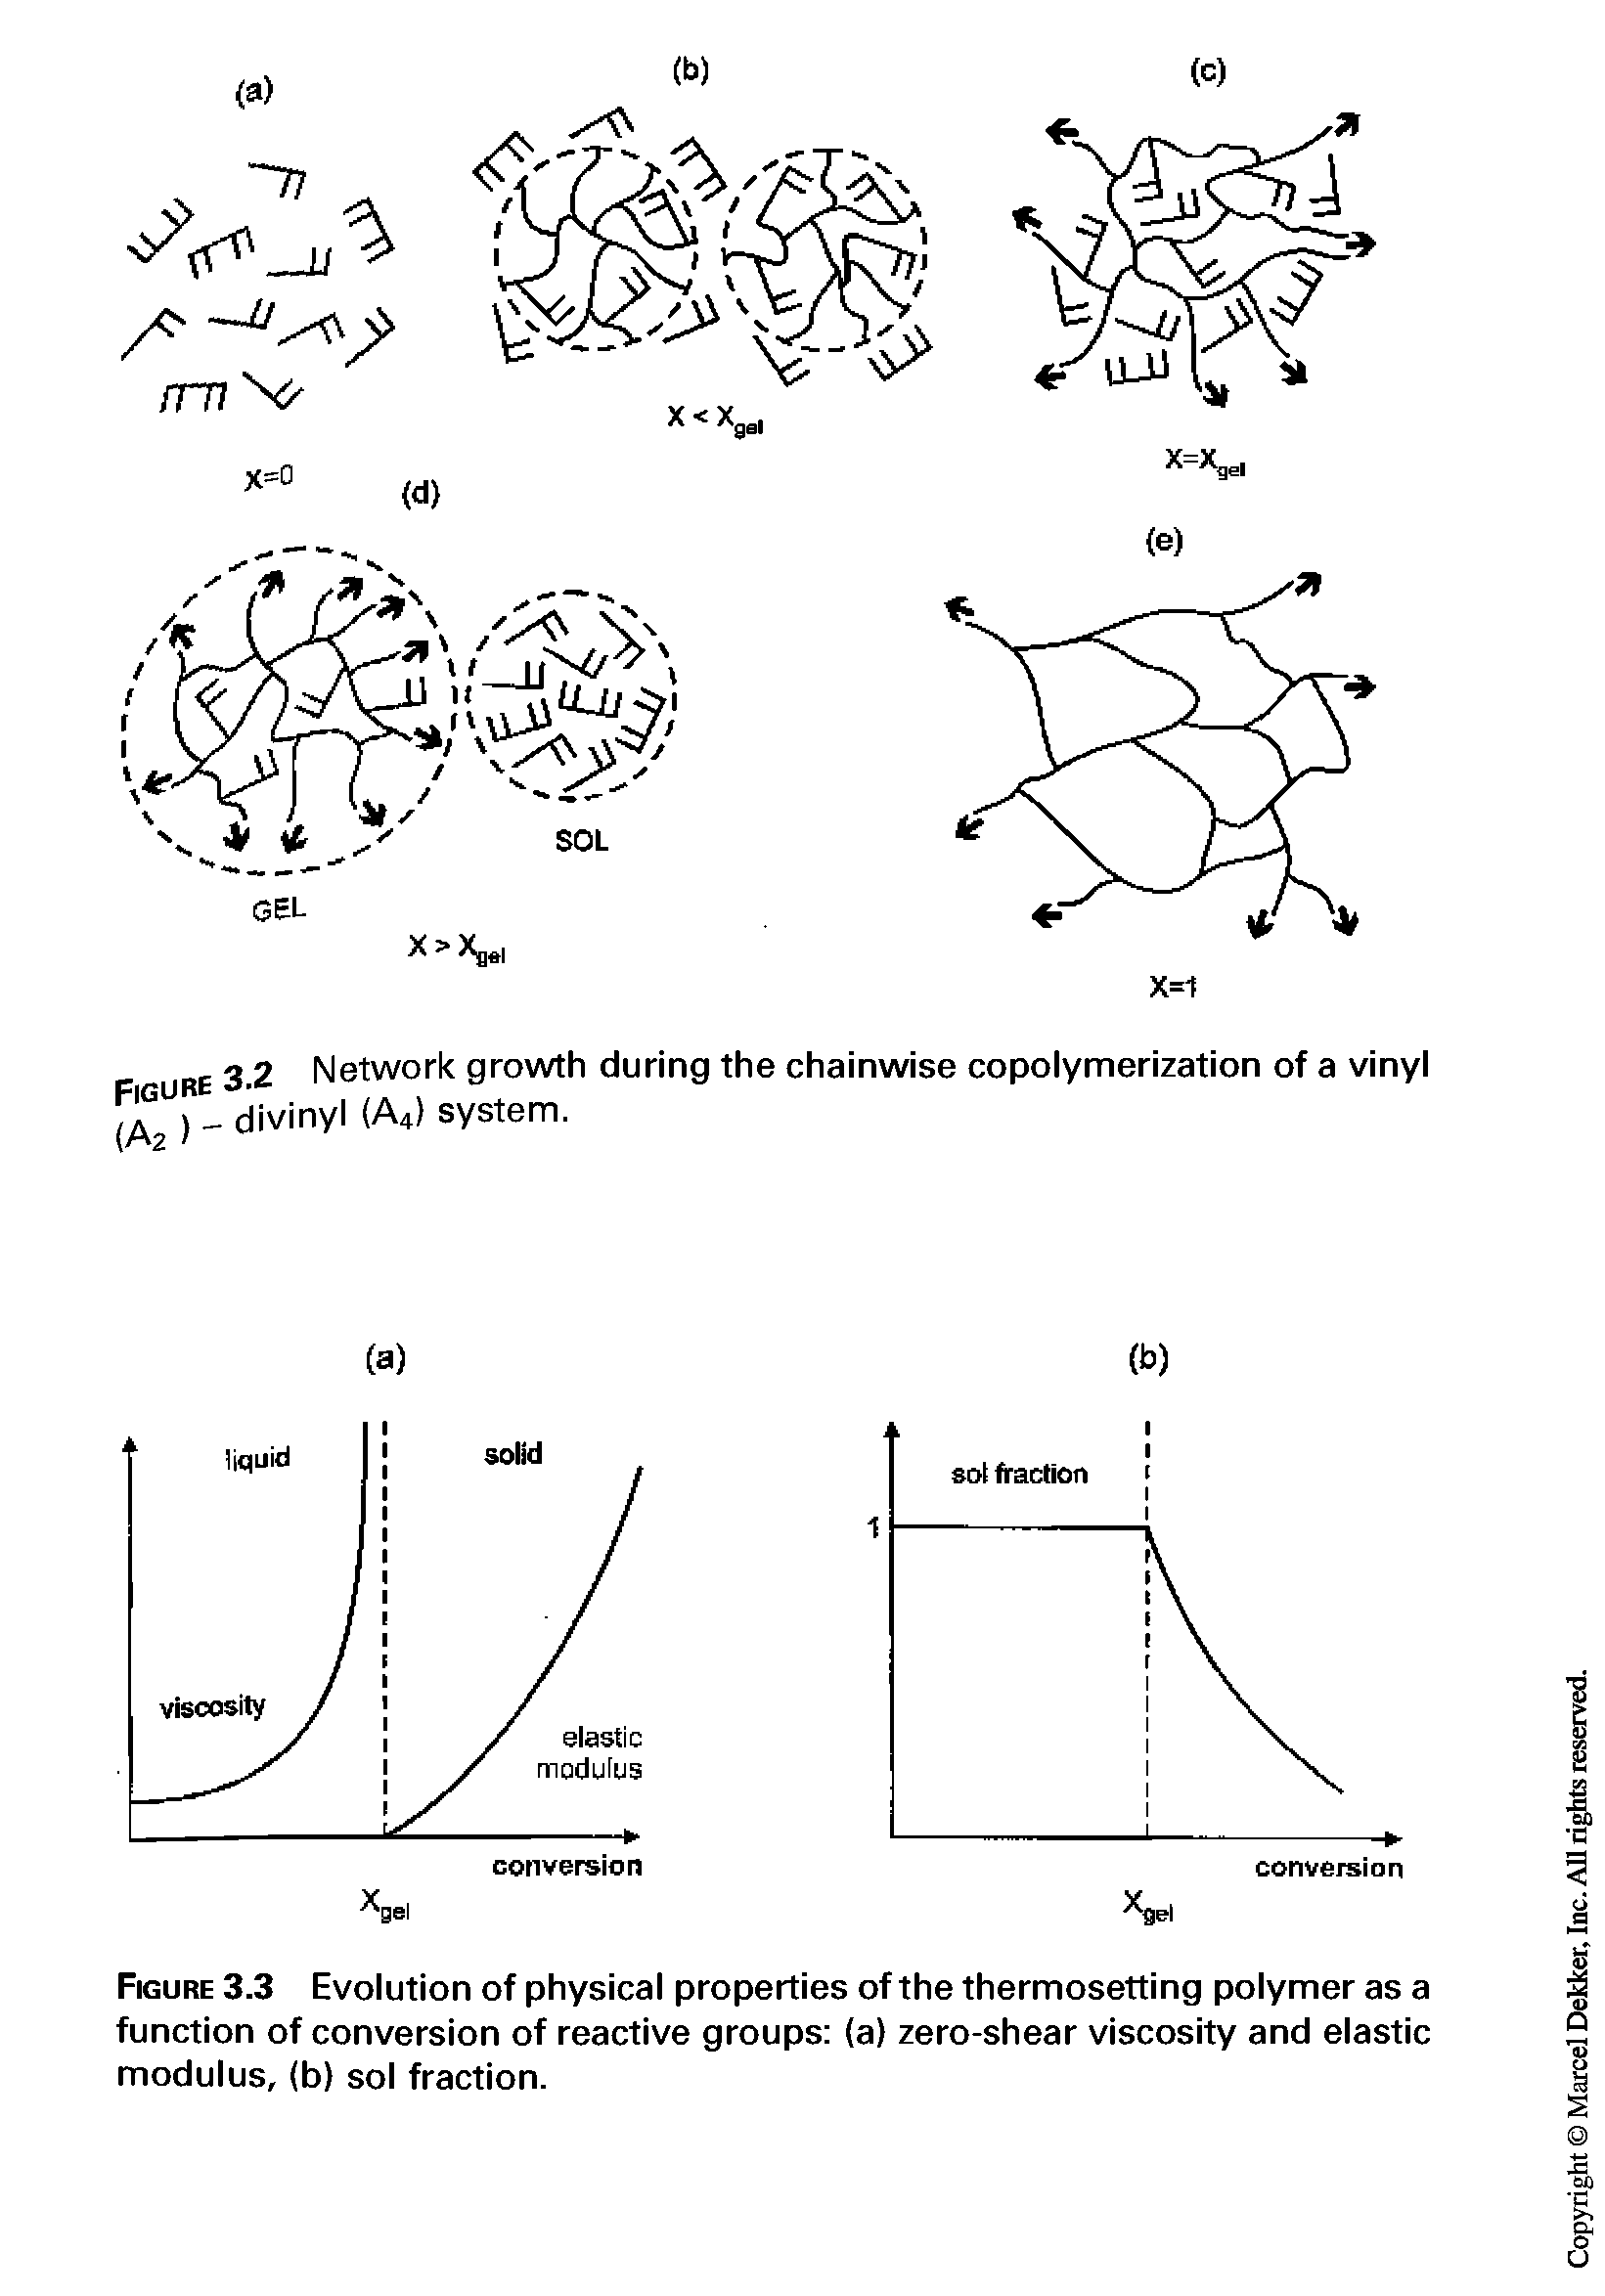 Figure 3.3 Evolution of physical properties of the thermosetting polymer as a function of conversion of reactive groups (a) zero-shear viscosity and elastic modulus, (b) sol fraction.